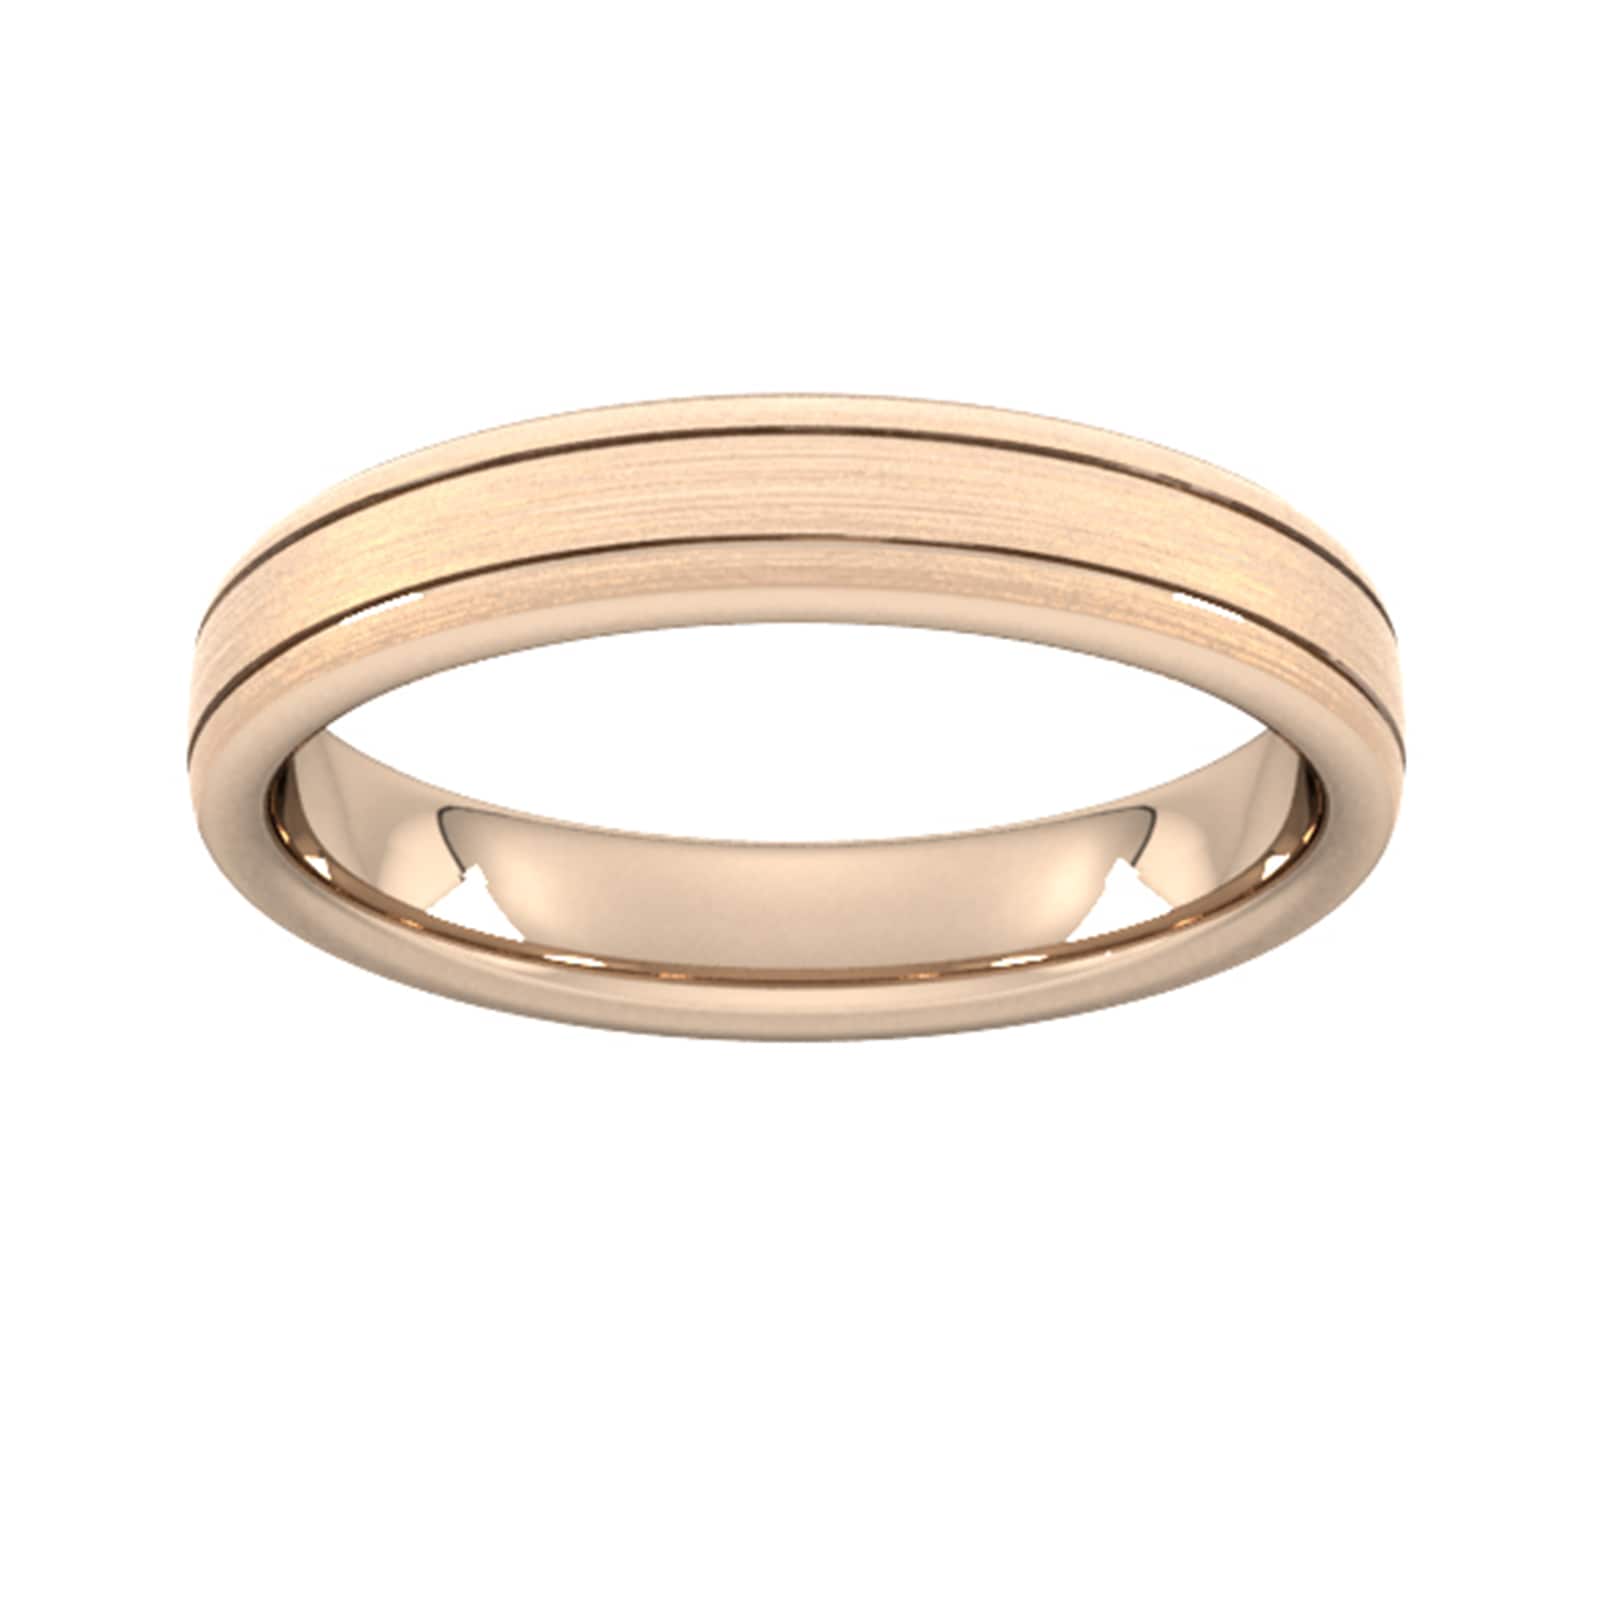 4mm Slight Court Standard Matt Finish With Double Grooves Wedding Ring In 18 Carat Rose Gold - Ring Size K